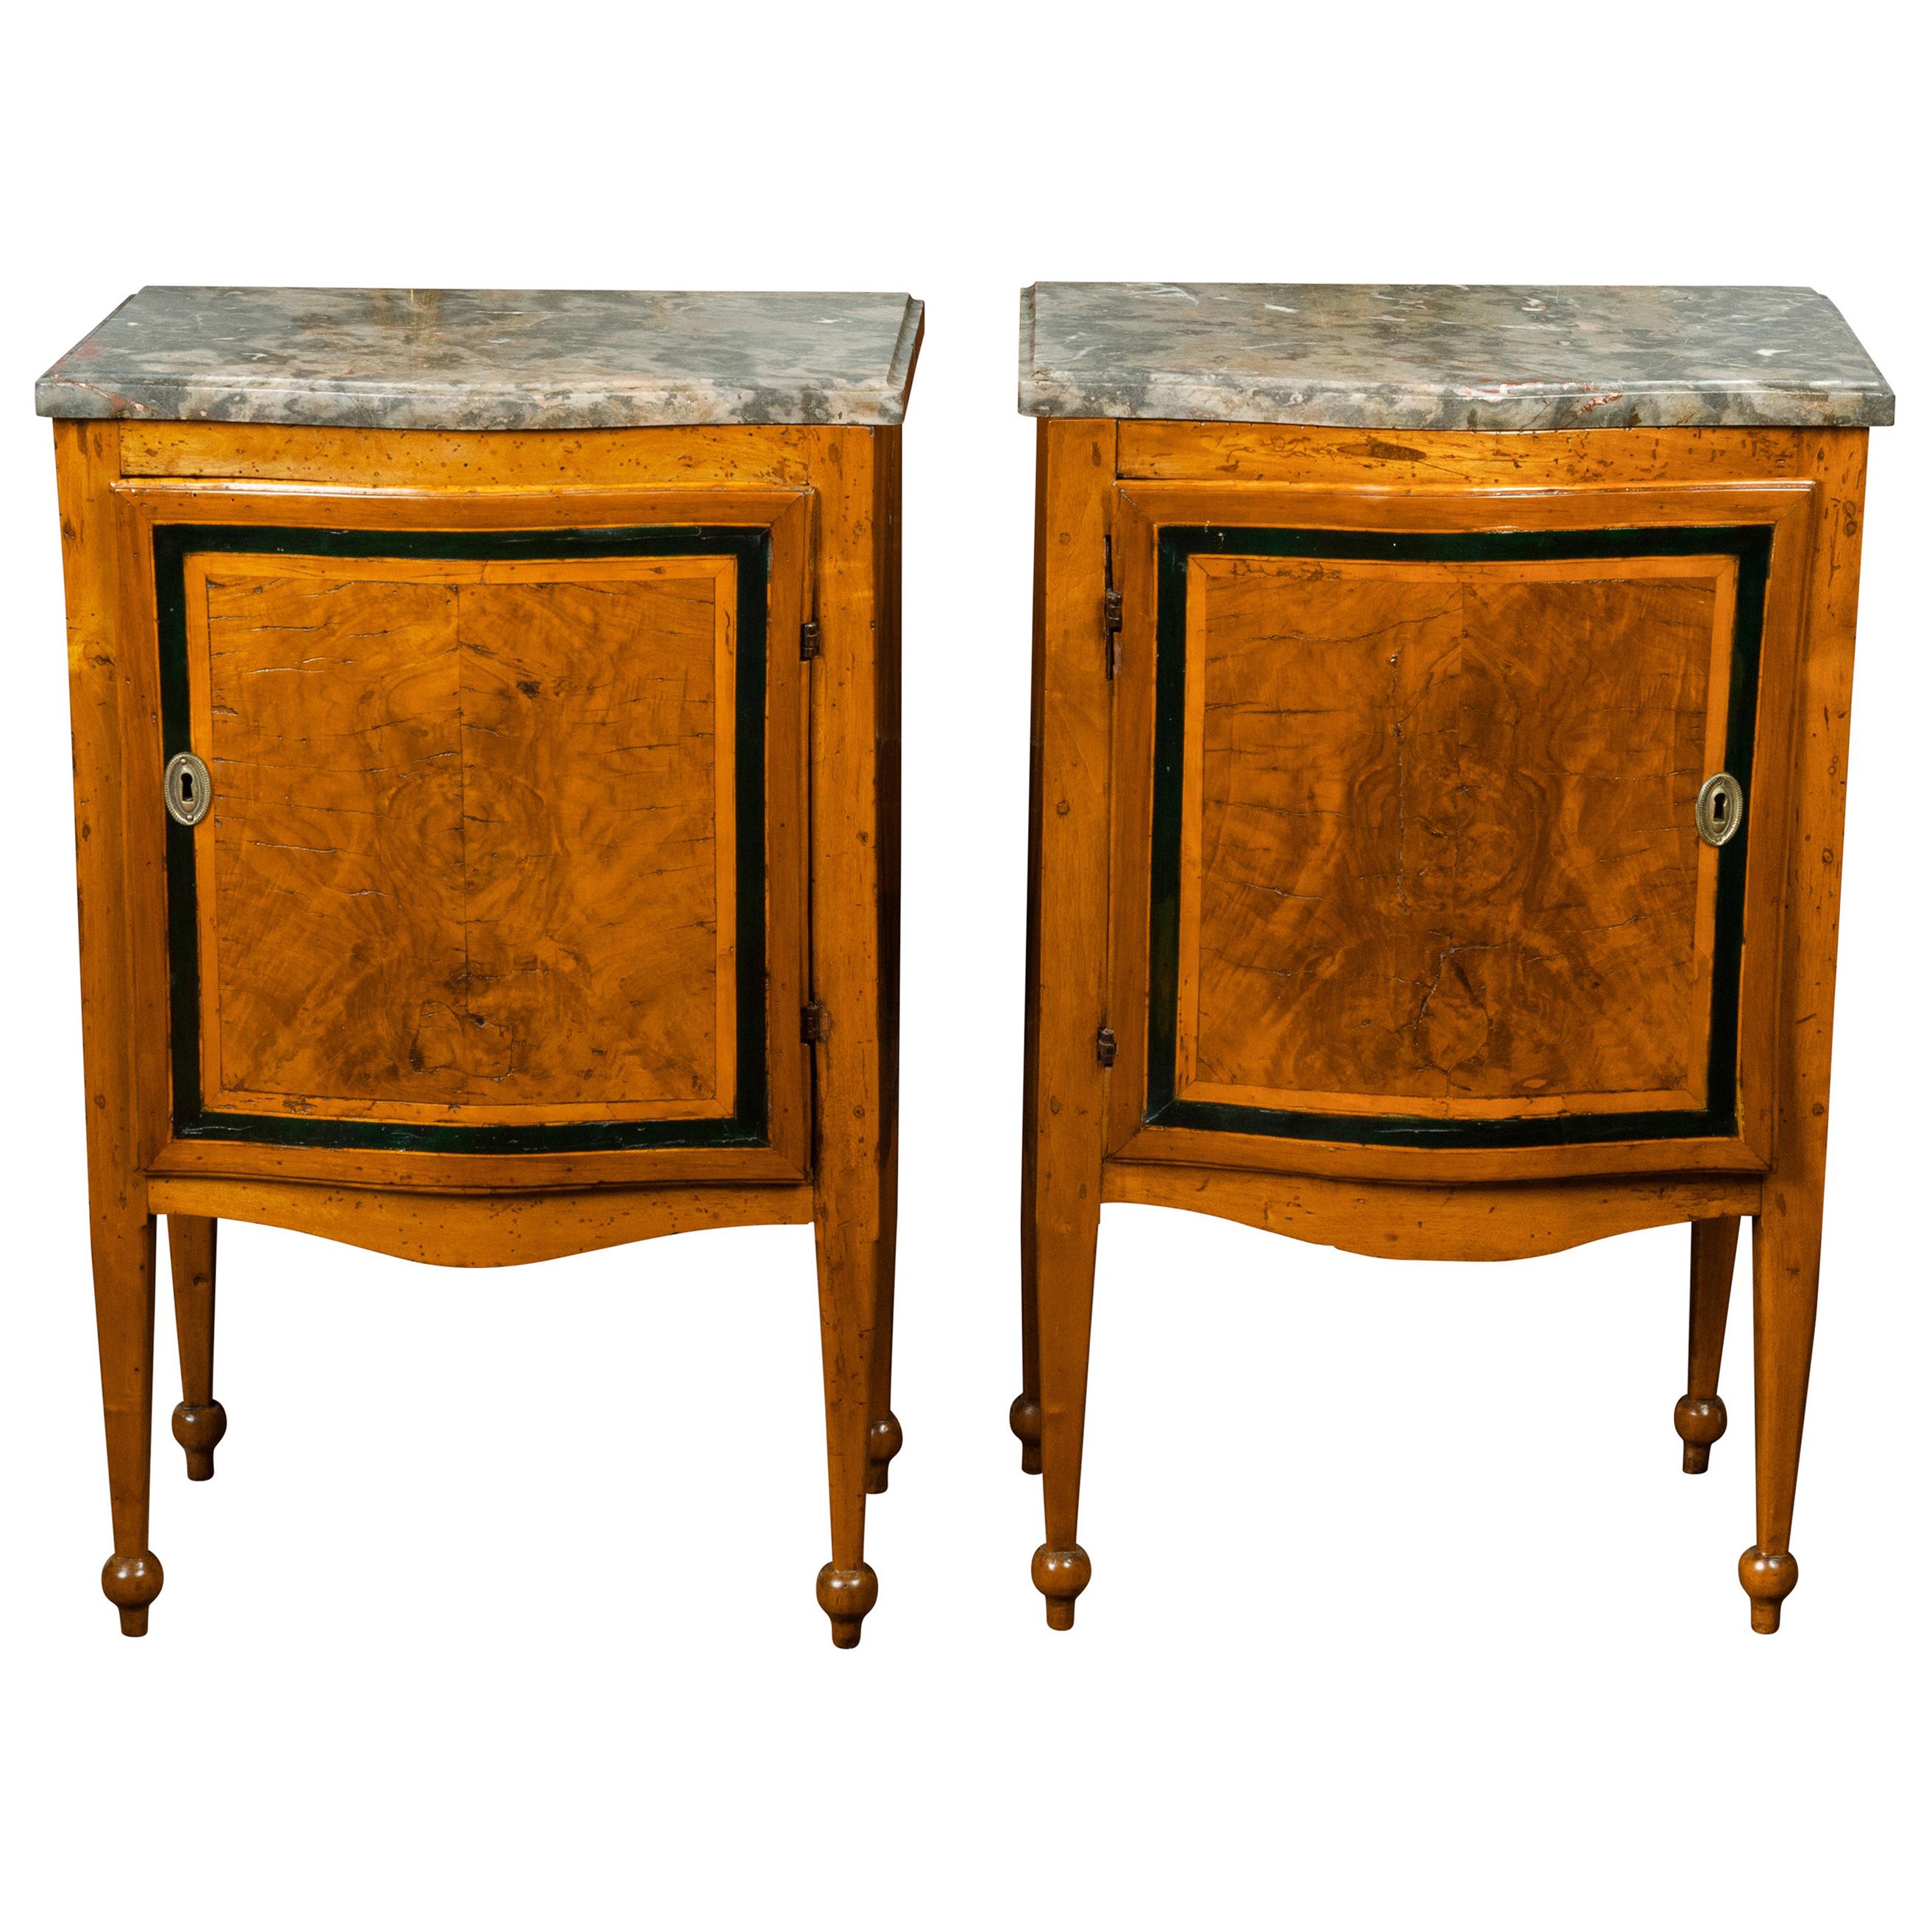 Pair of Italian 1840s Walnut Tables with Variegated Marble Top and Single Door For Sale